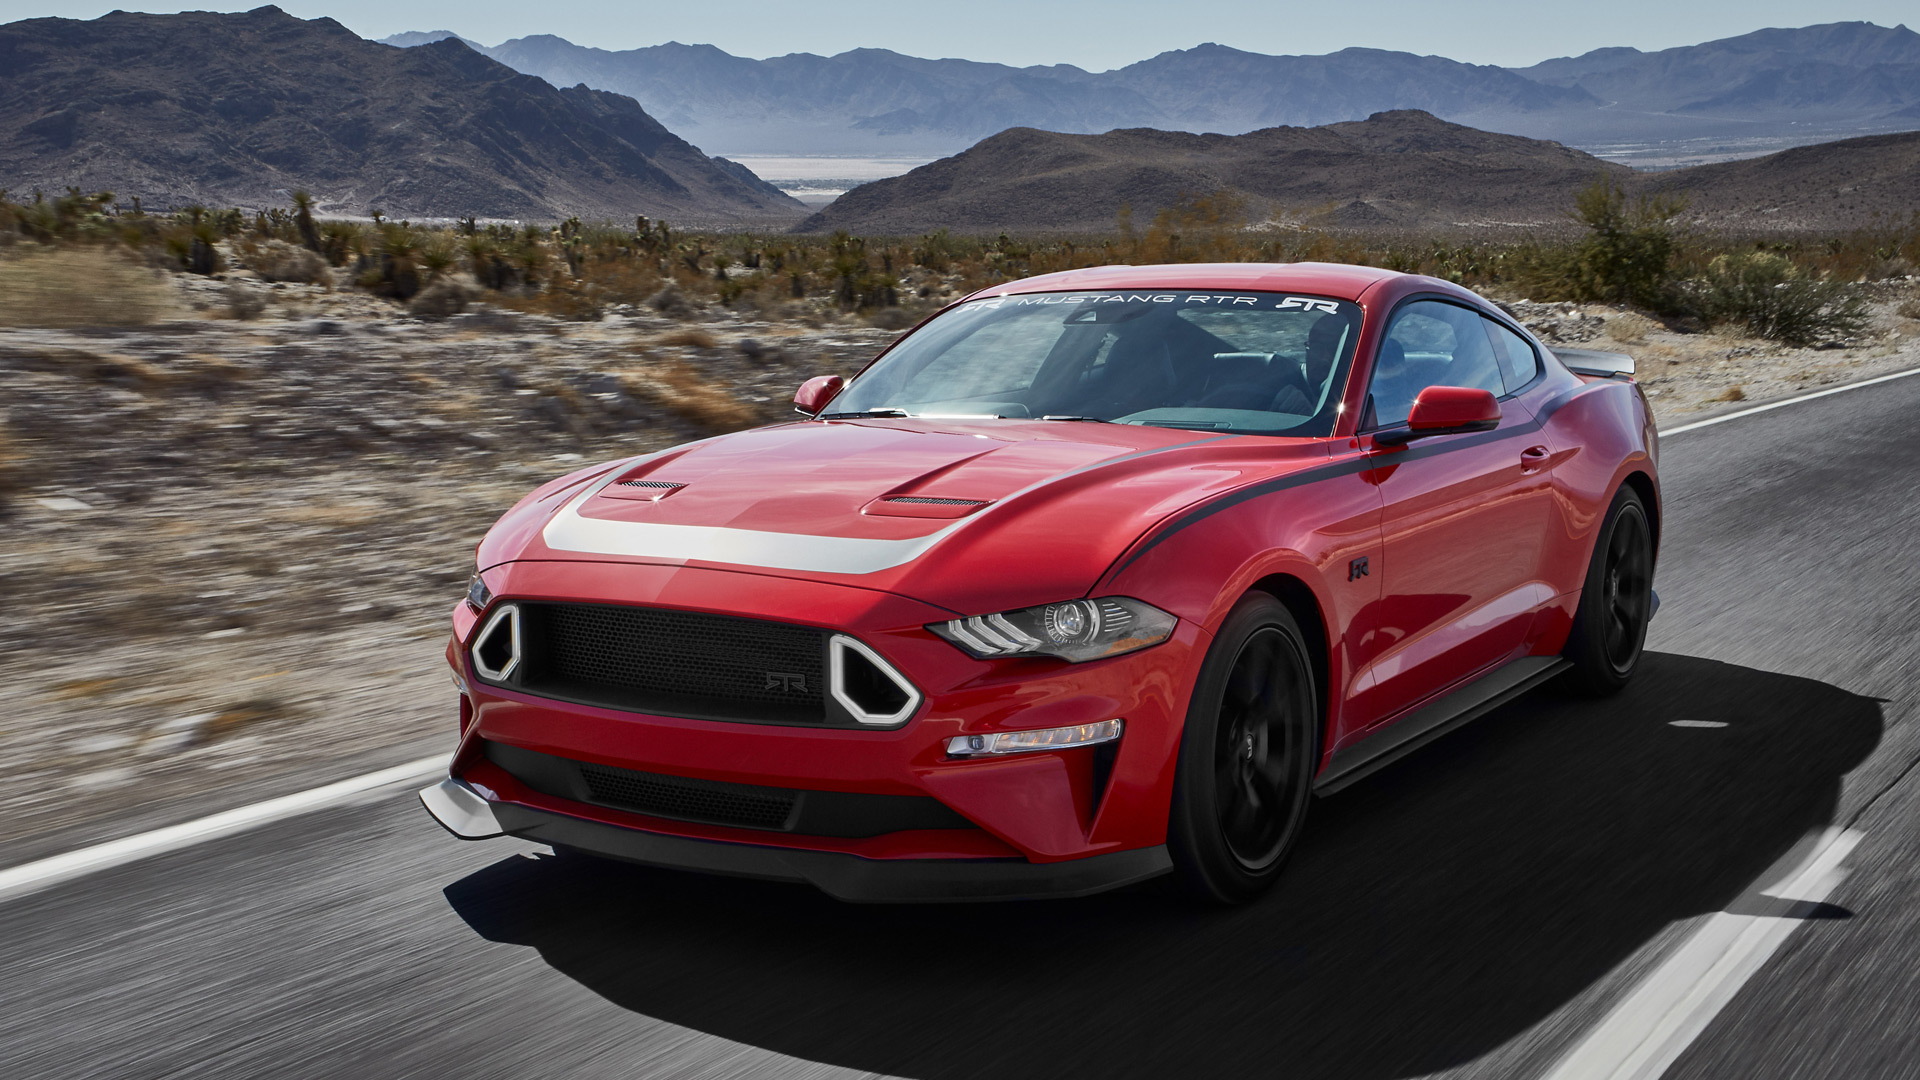 2019 Series 1 Mustang RTR Powered by Ford Performance